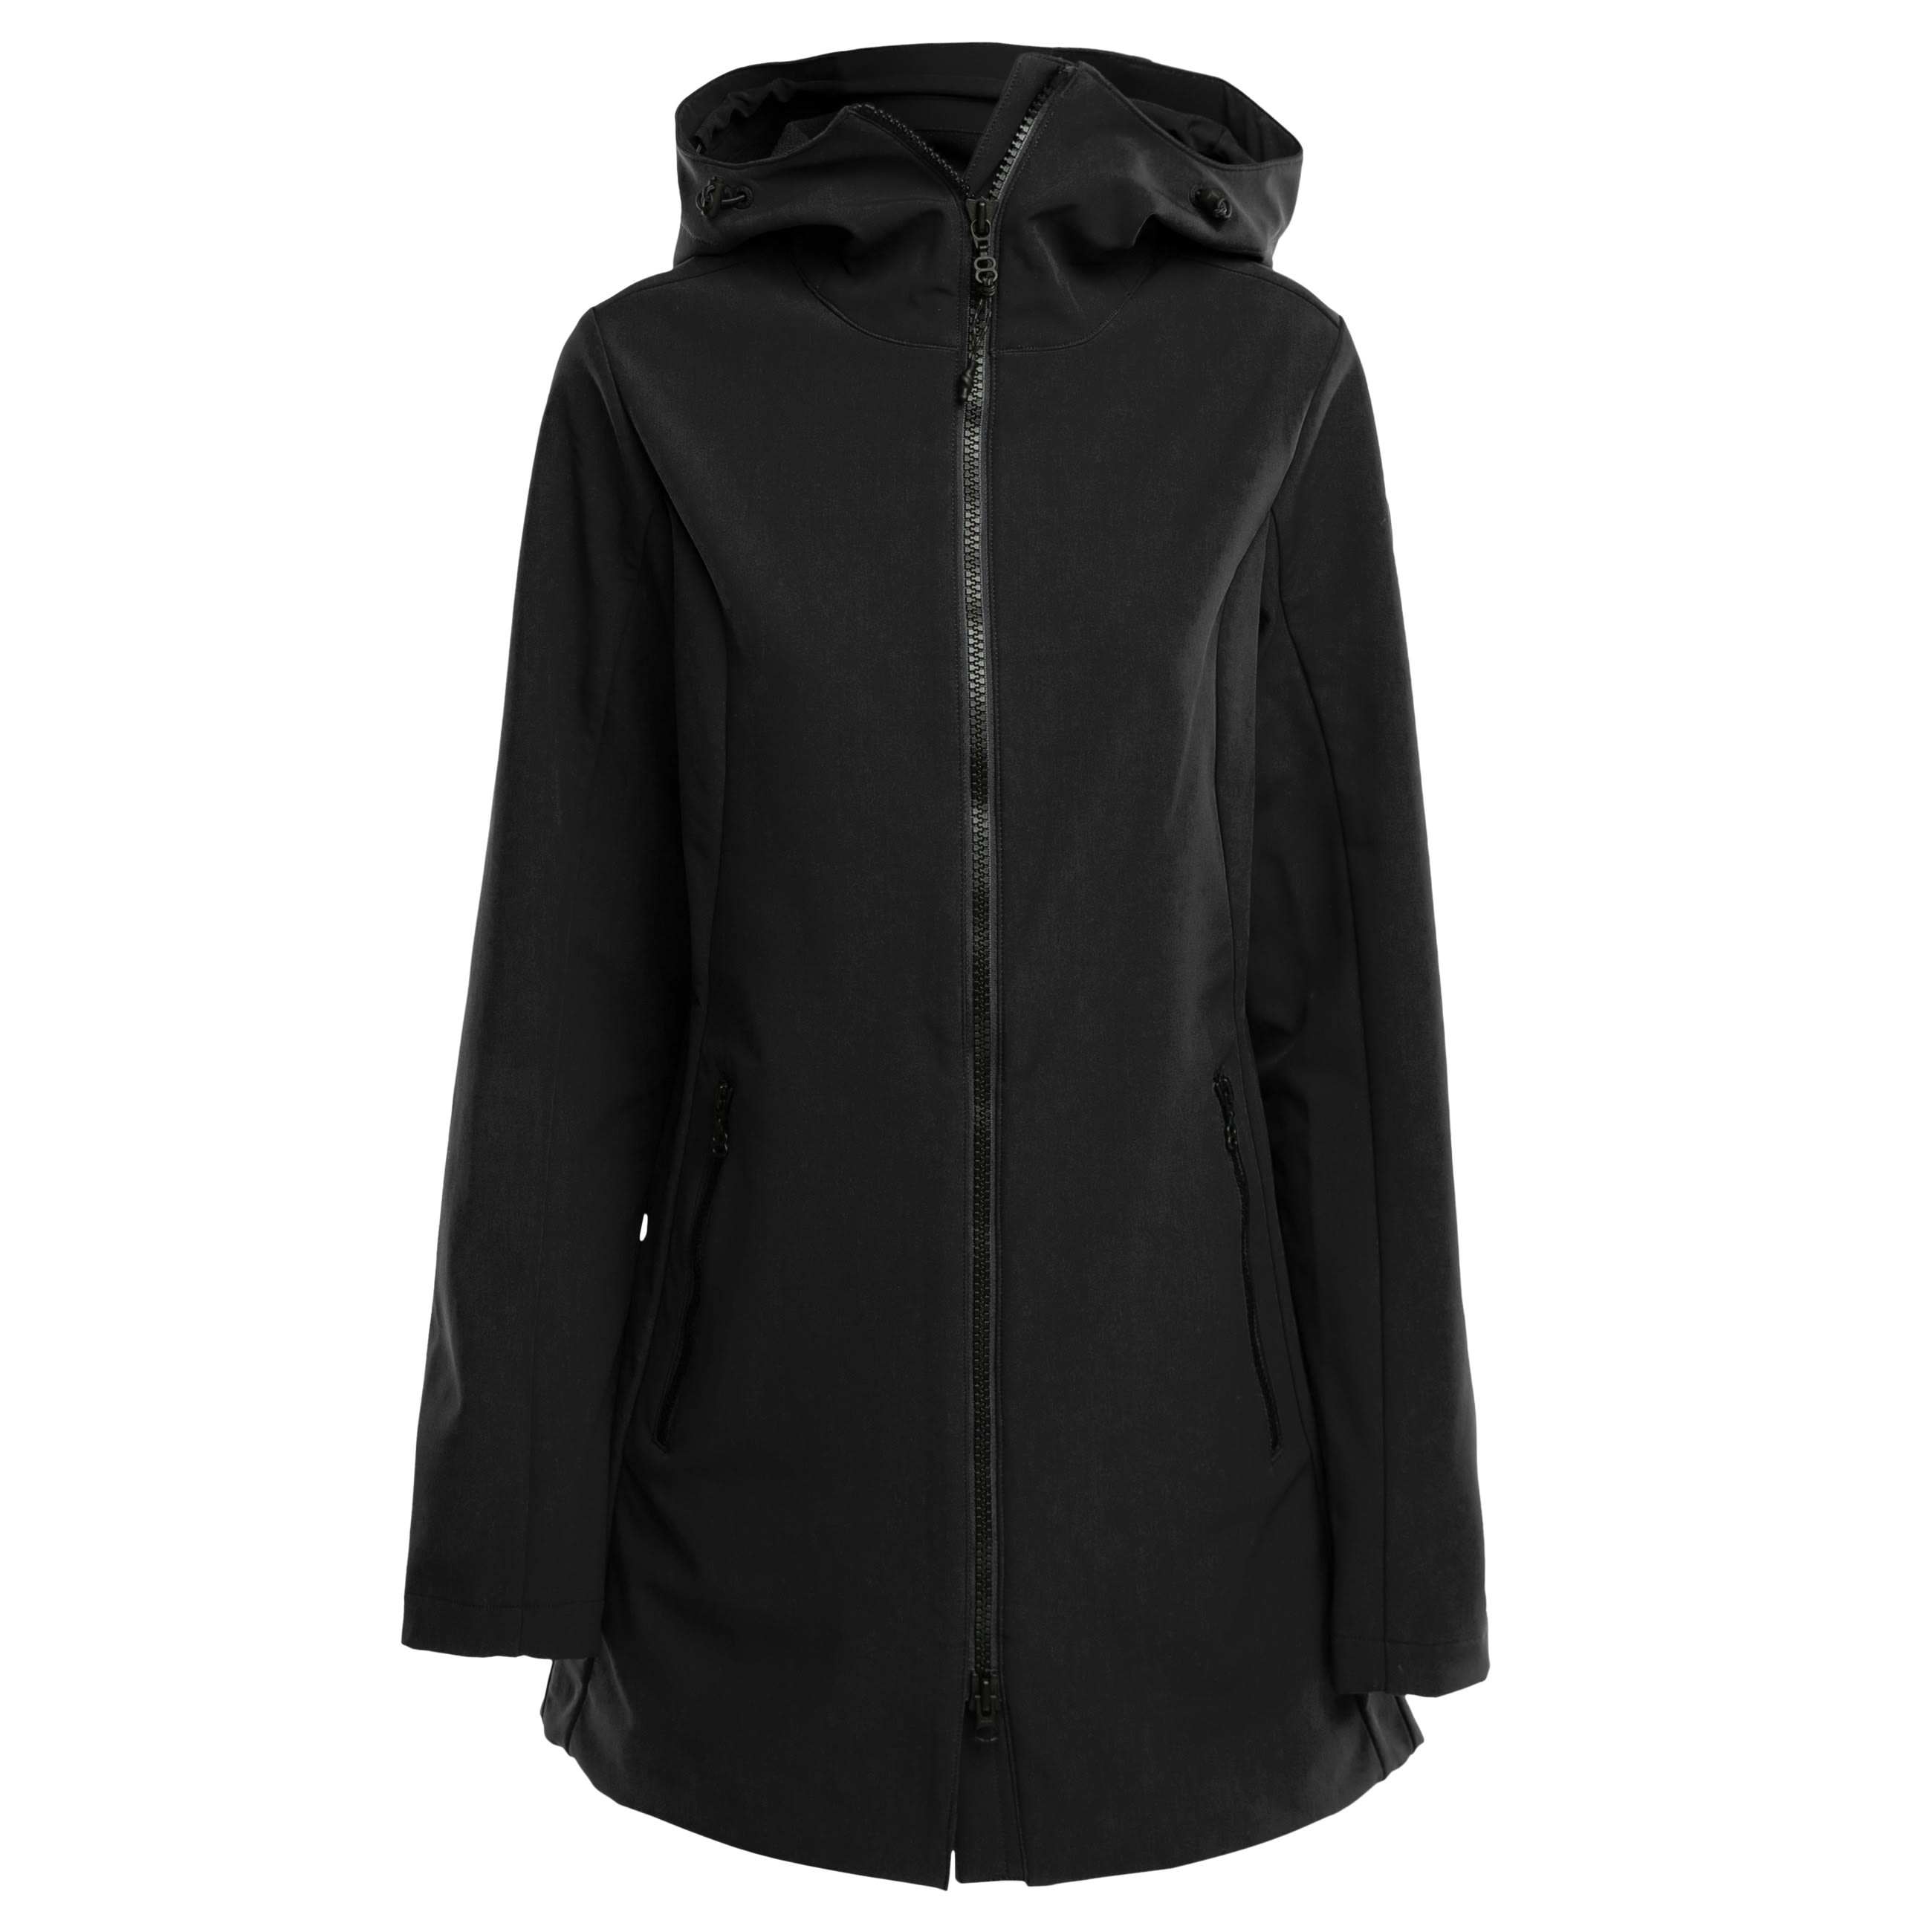 Buy Altitude Women's Zoe Jacket from Outnorth